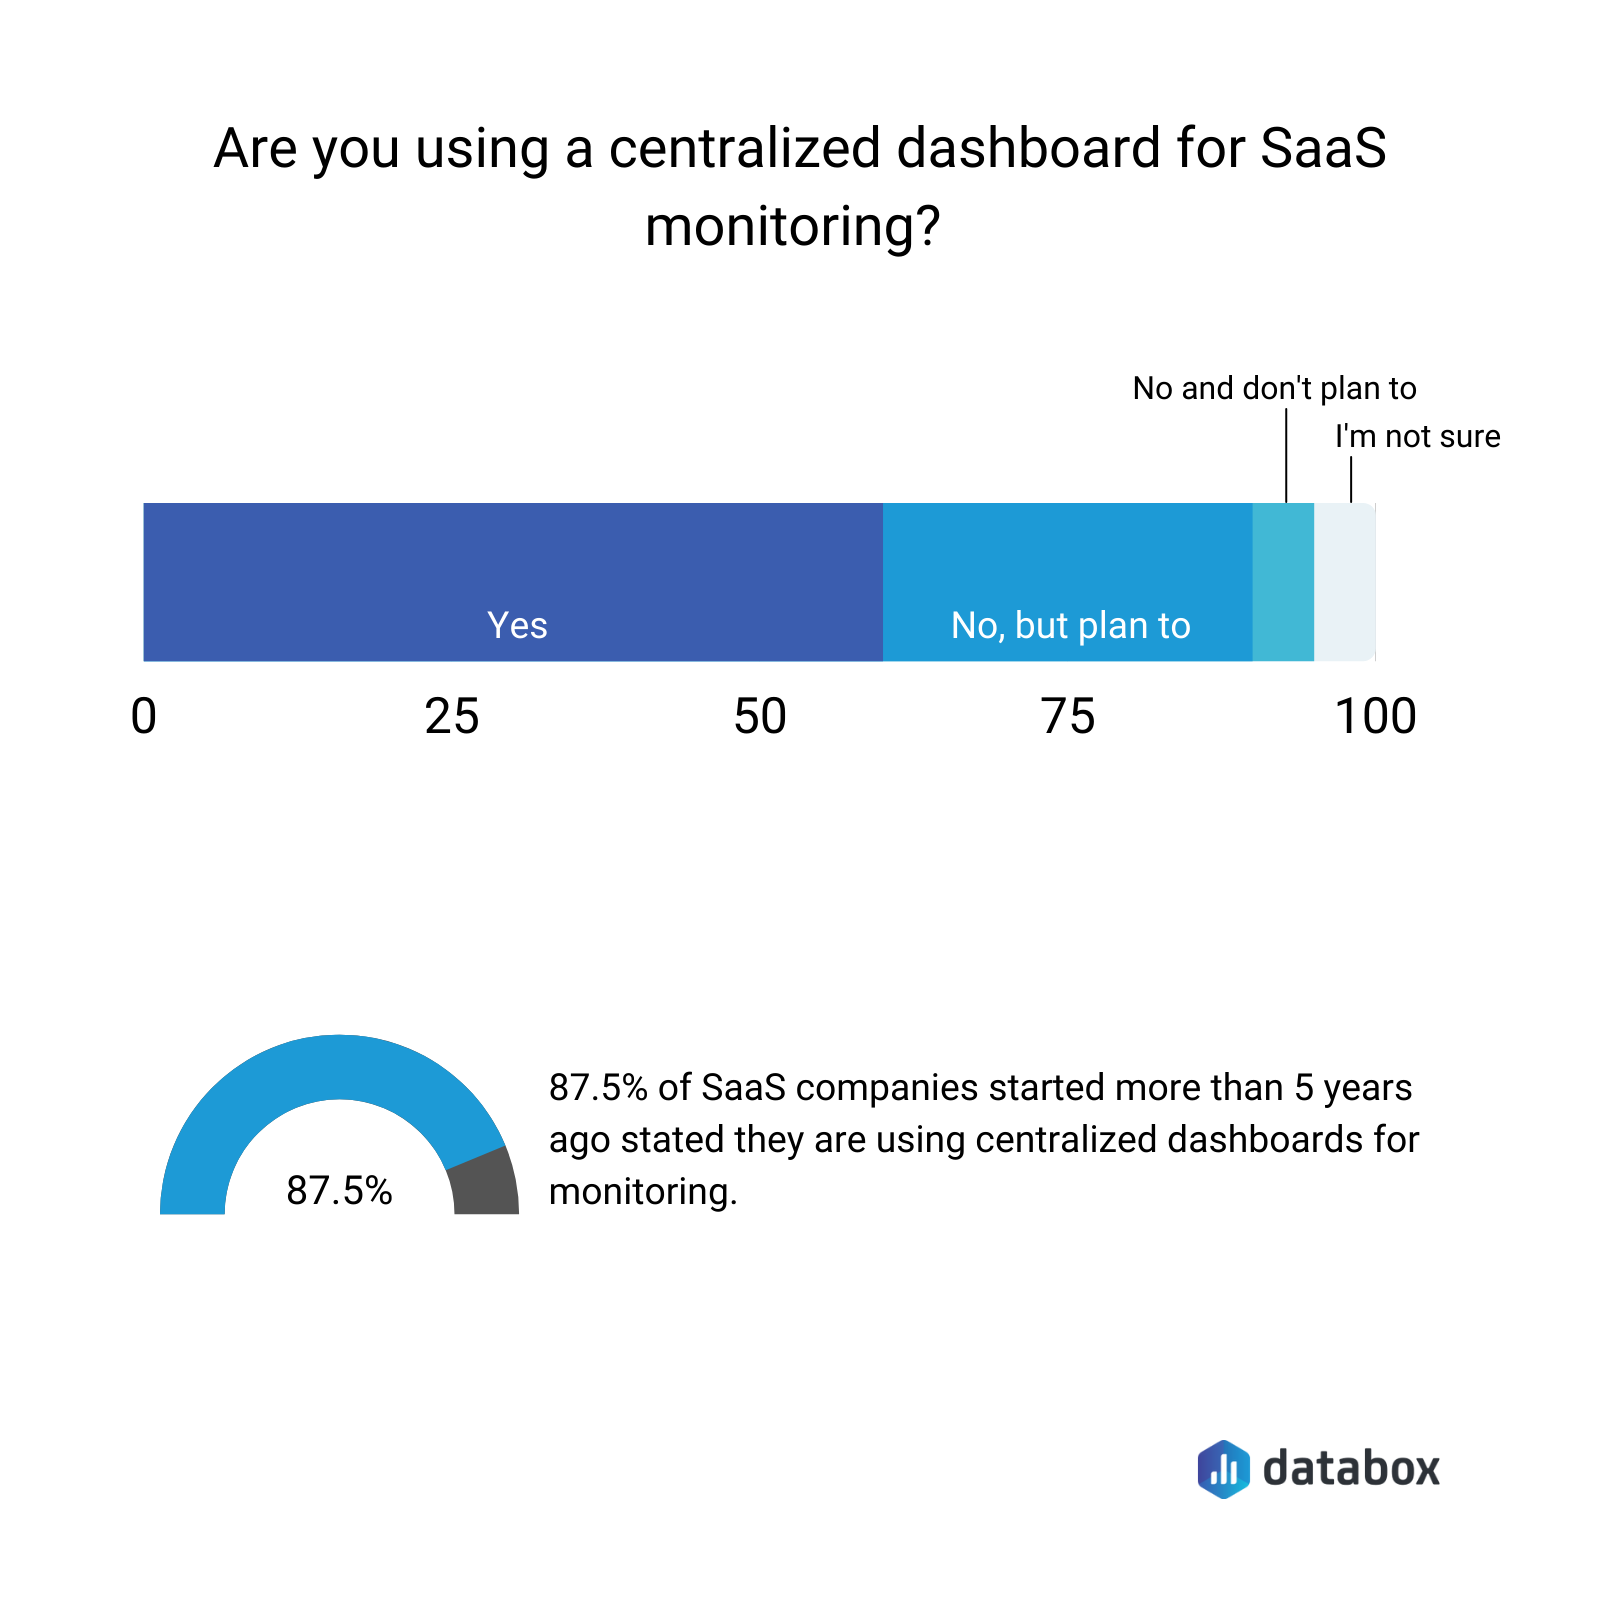 are you using a centralized dashboard for saas monitoring